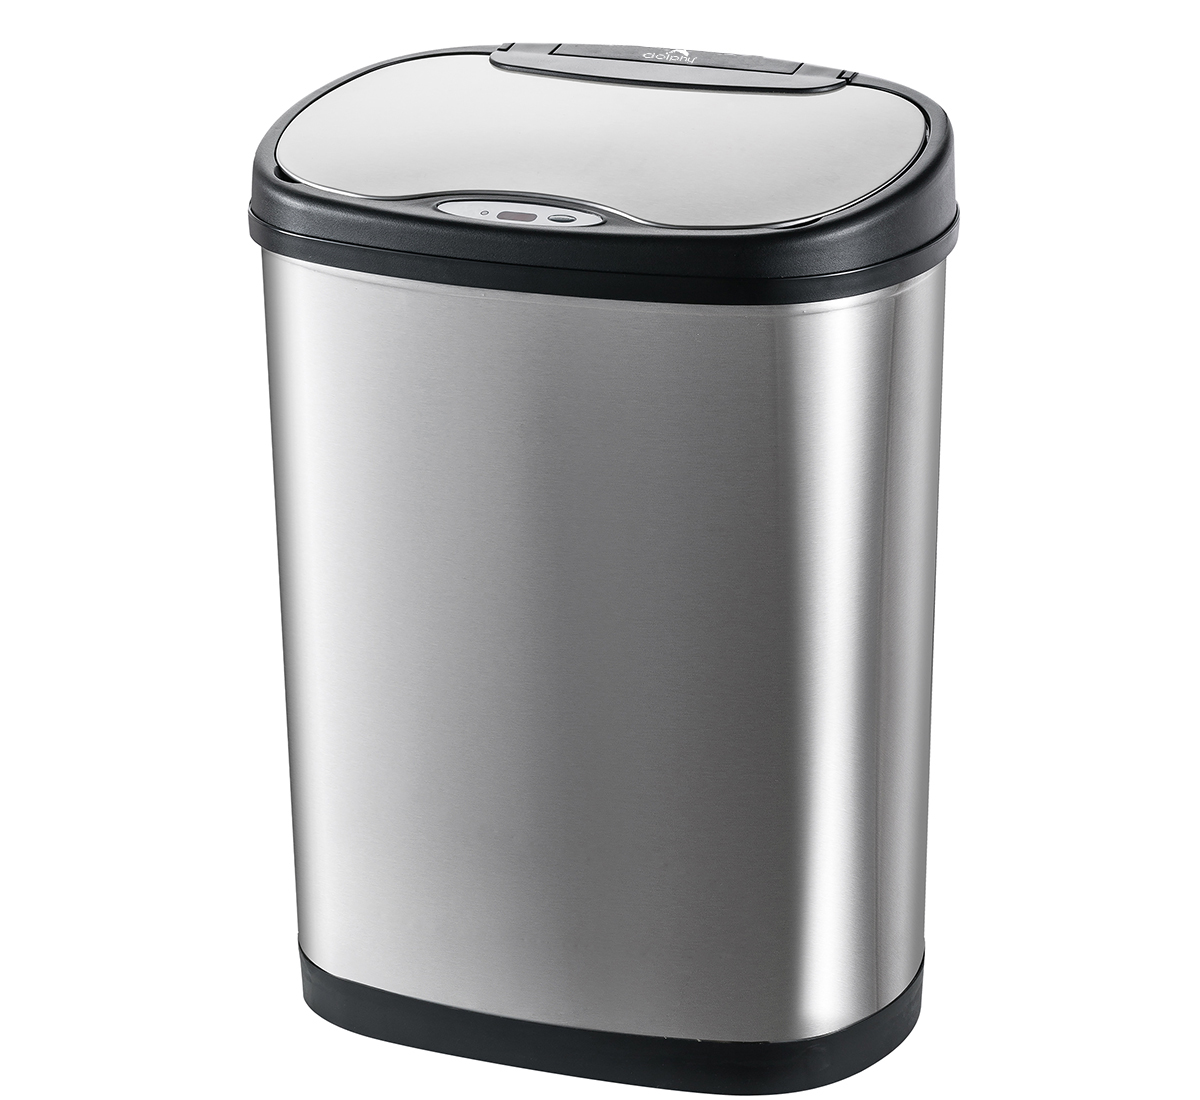 42L Automatic High Tech Stainless Steel Trash Bins
